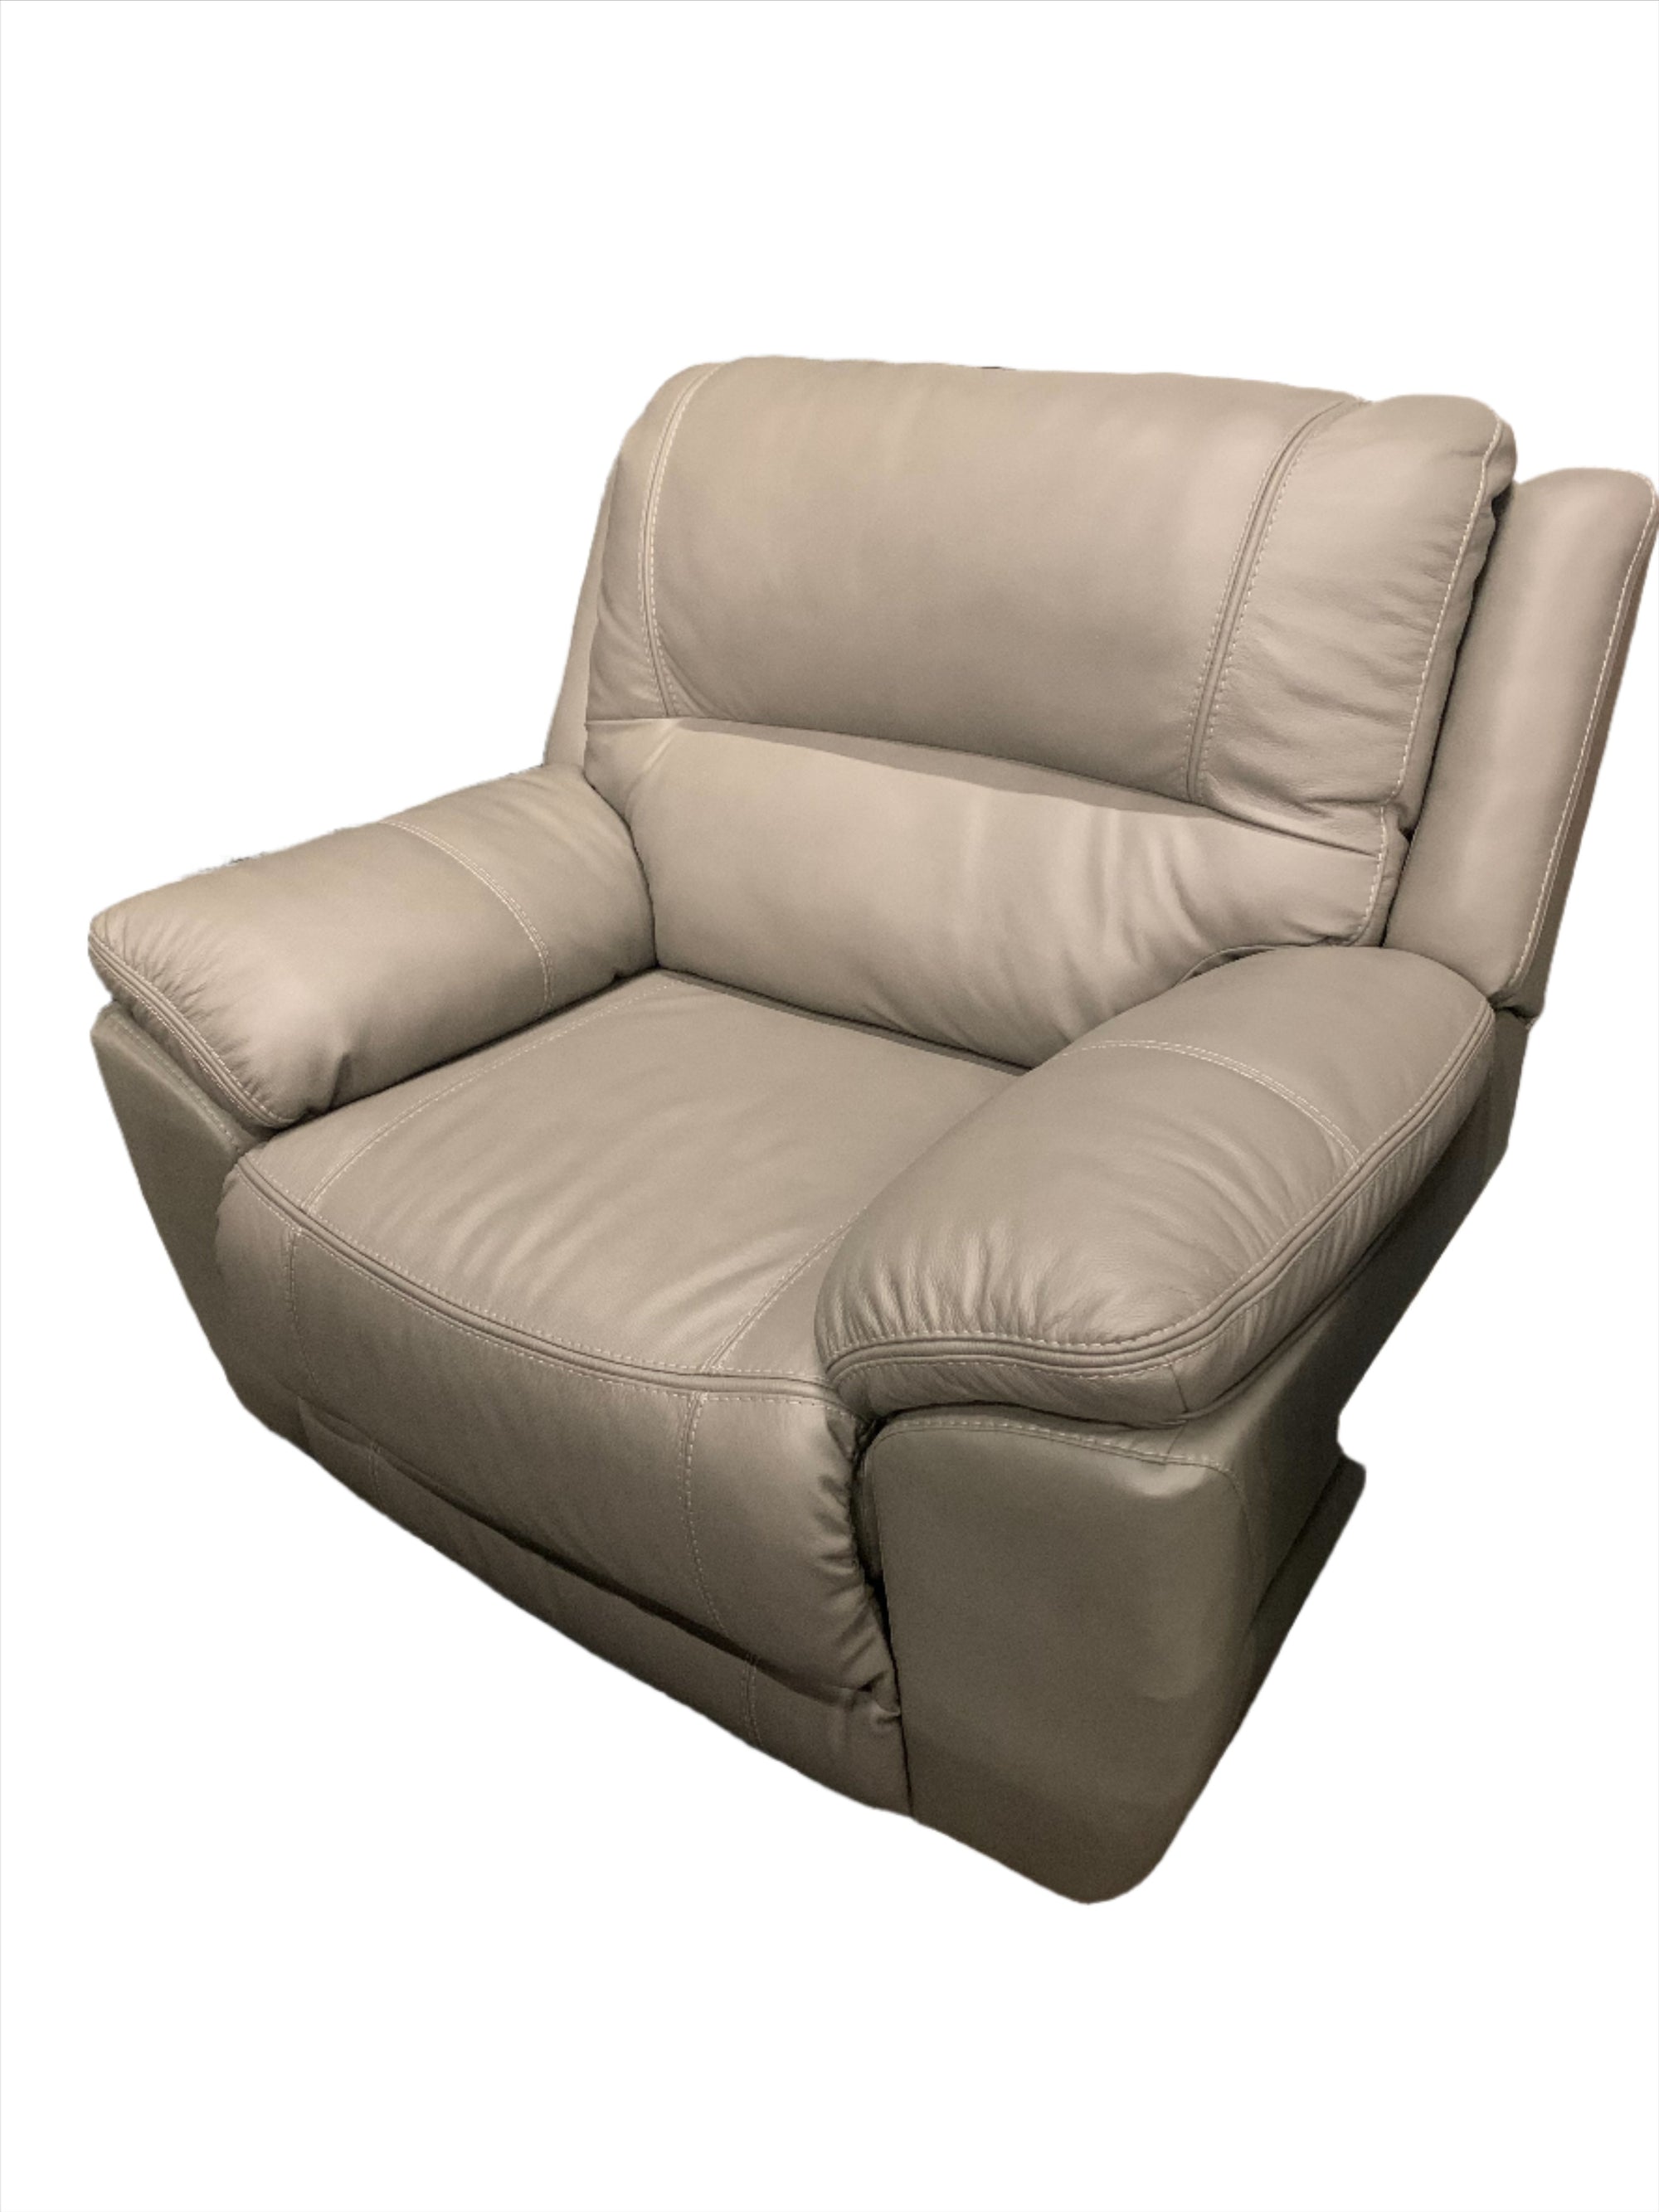 U827 FI-A Zero Wall, Leather Recliner w/ Adjustable Headrest and an Extended Ottoman